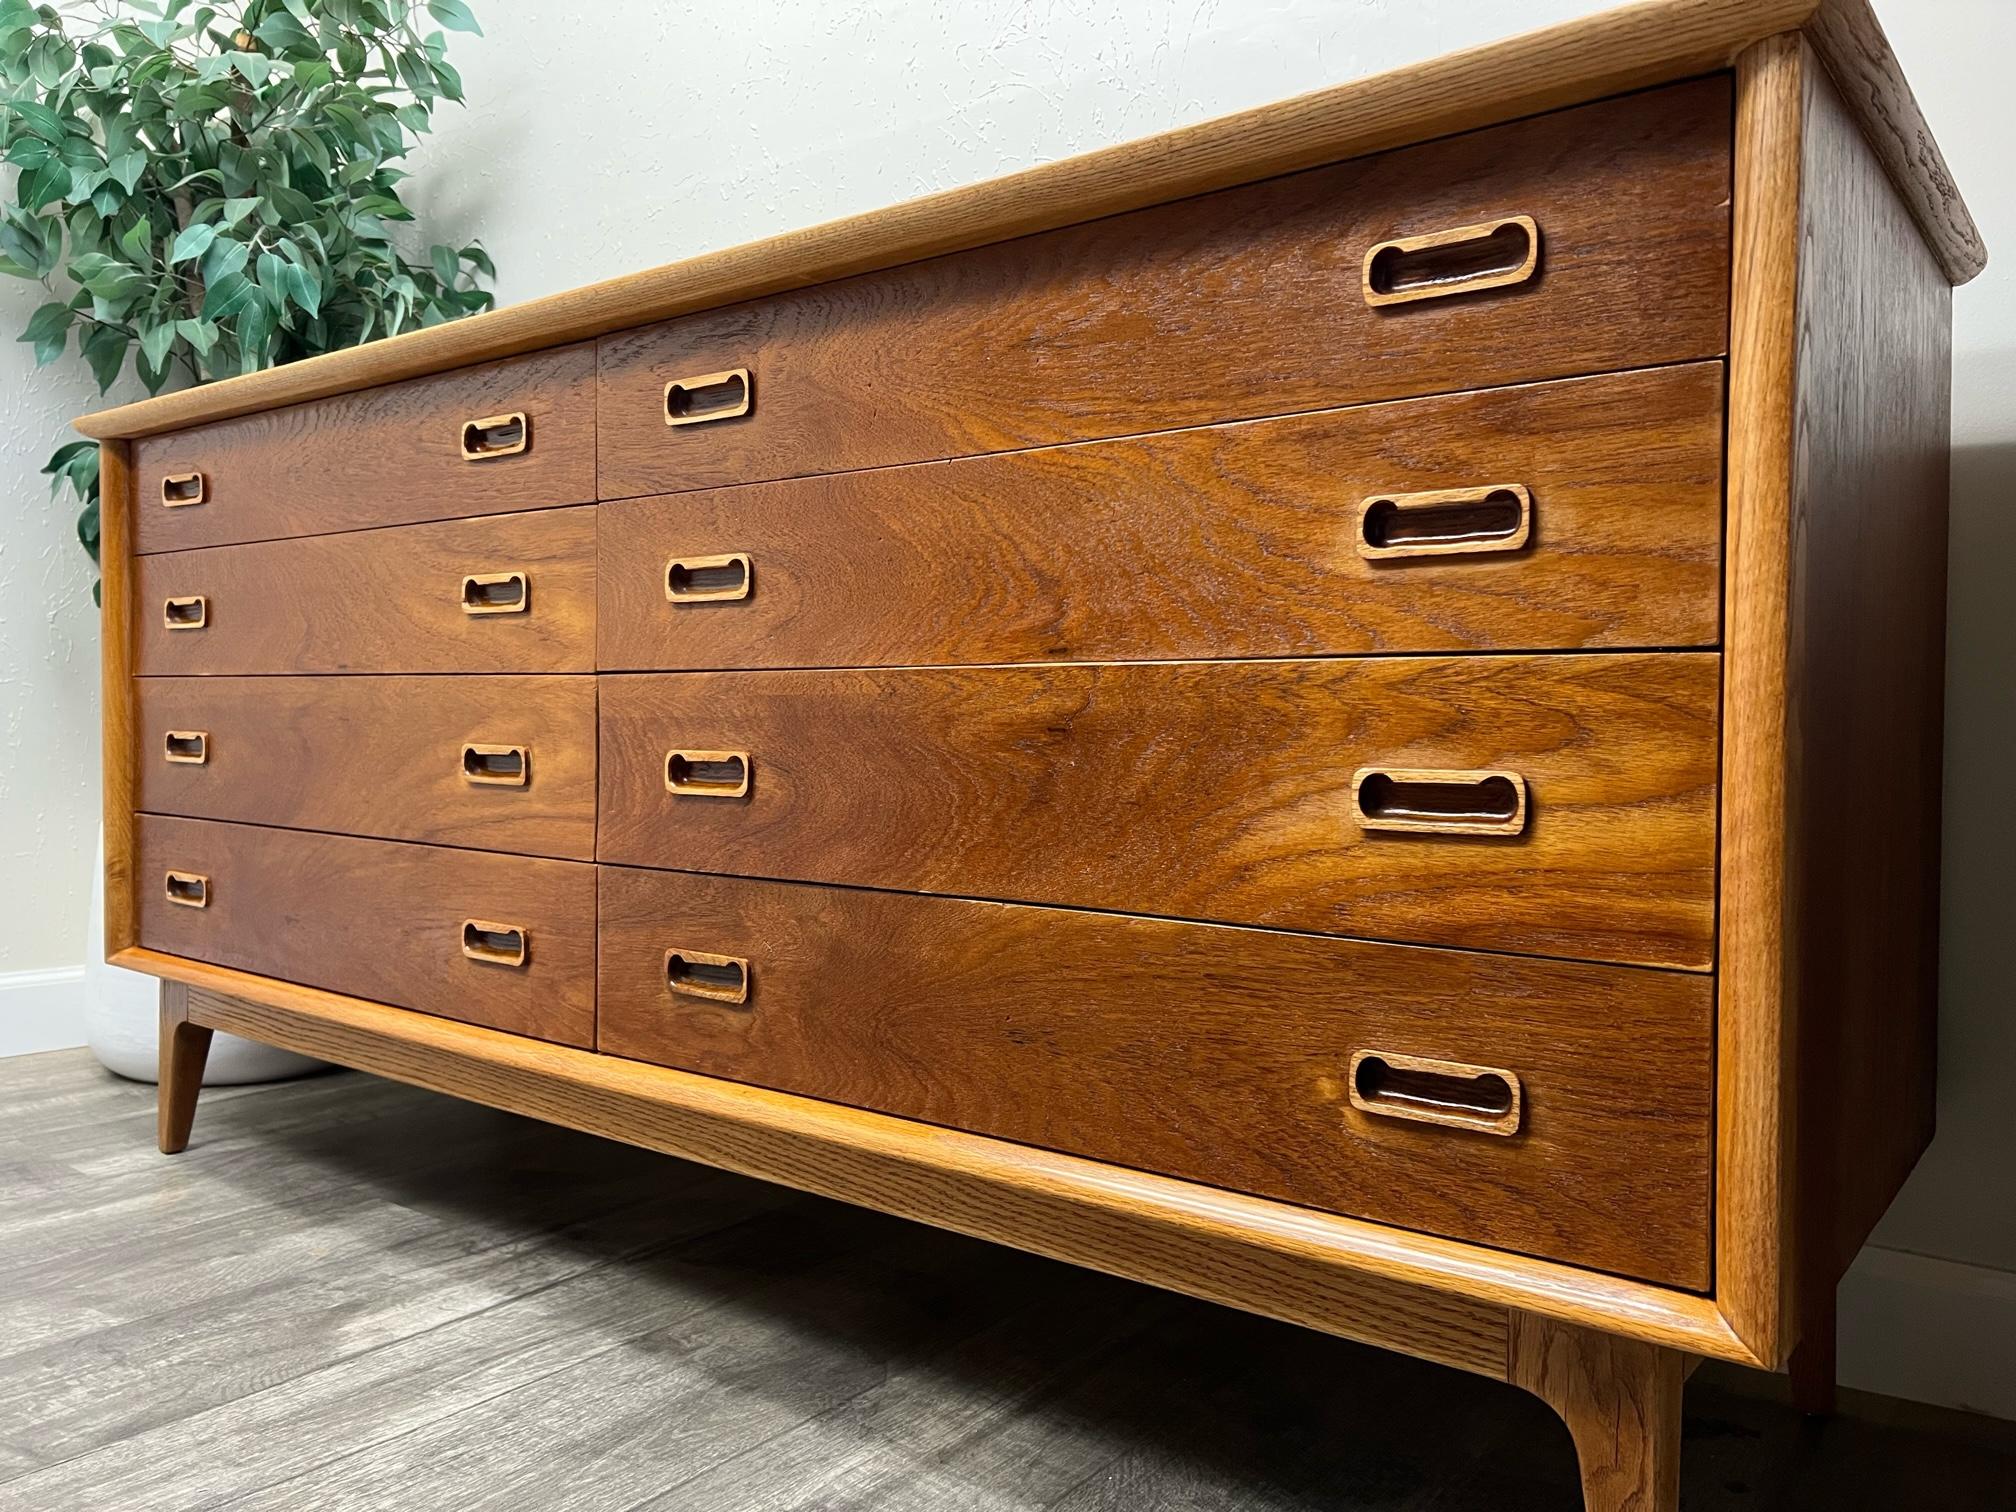 Double dresser in style of Arne Vodder for Sibast Mobelfabrik. In great condition with age-related signs of wear. Great combination of teak and oak wood. All 8 drawers glides easily, great quality dresser. 
 